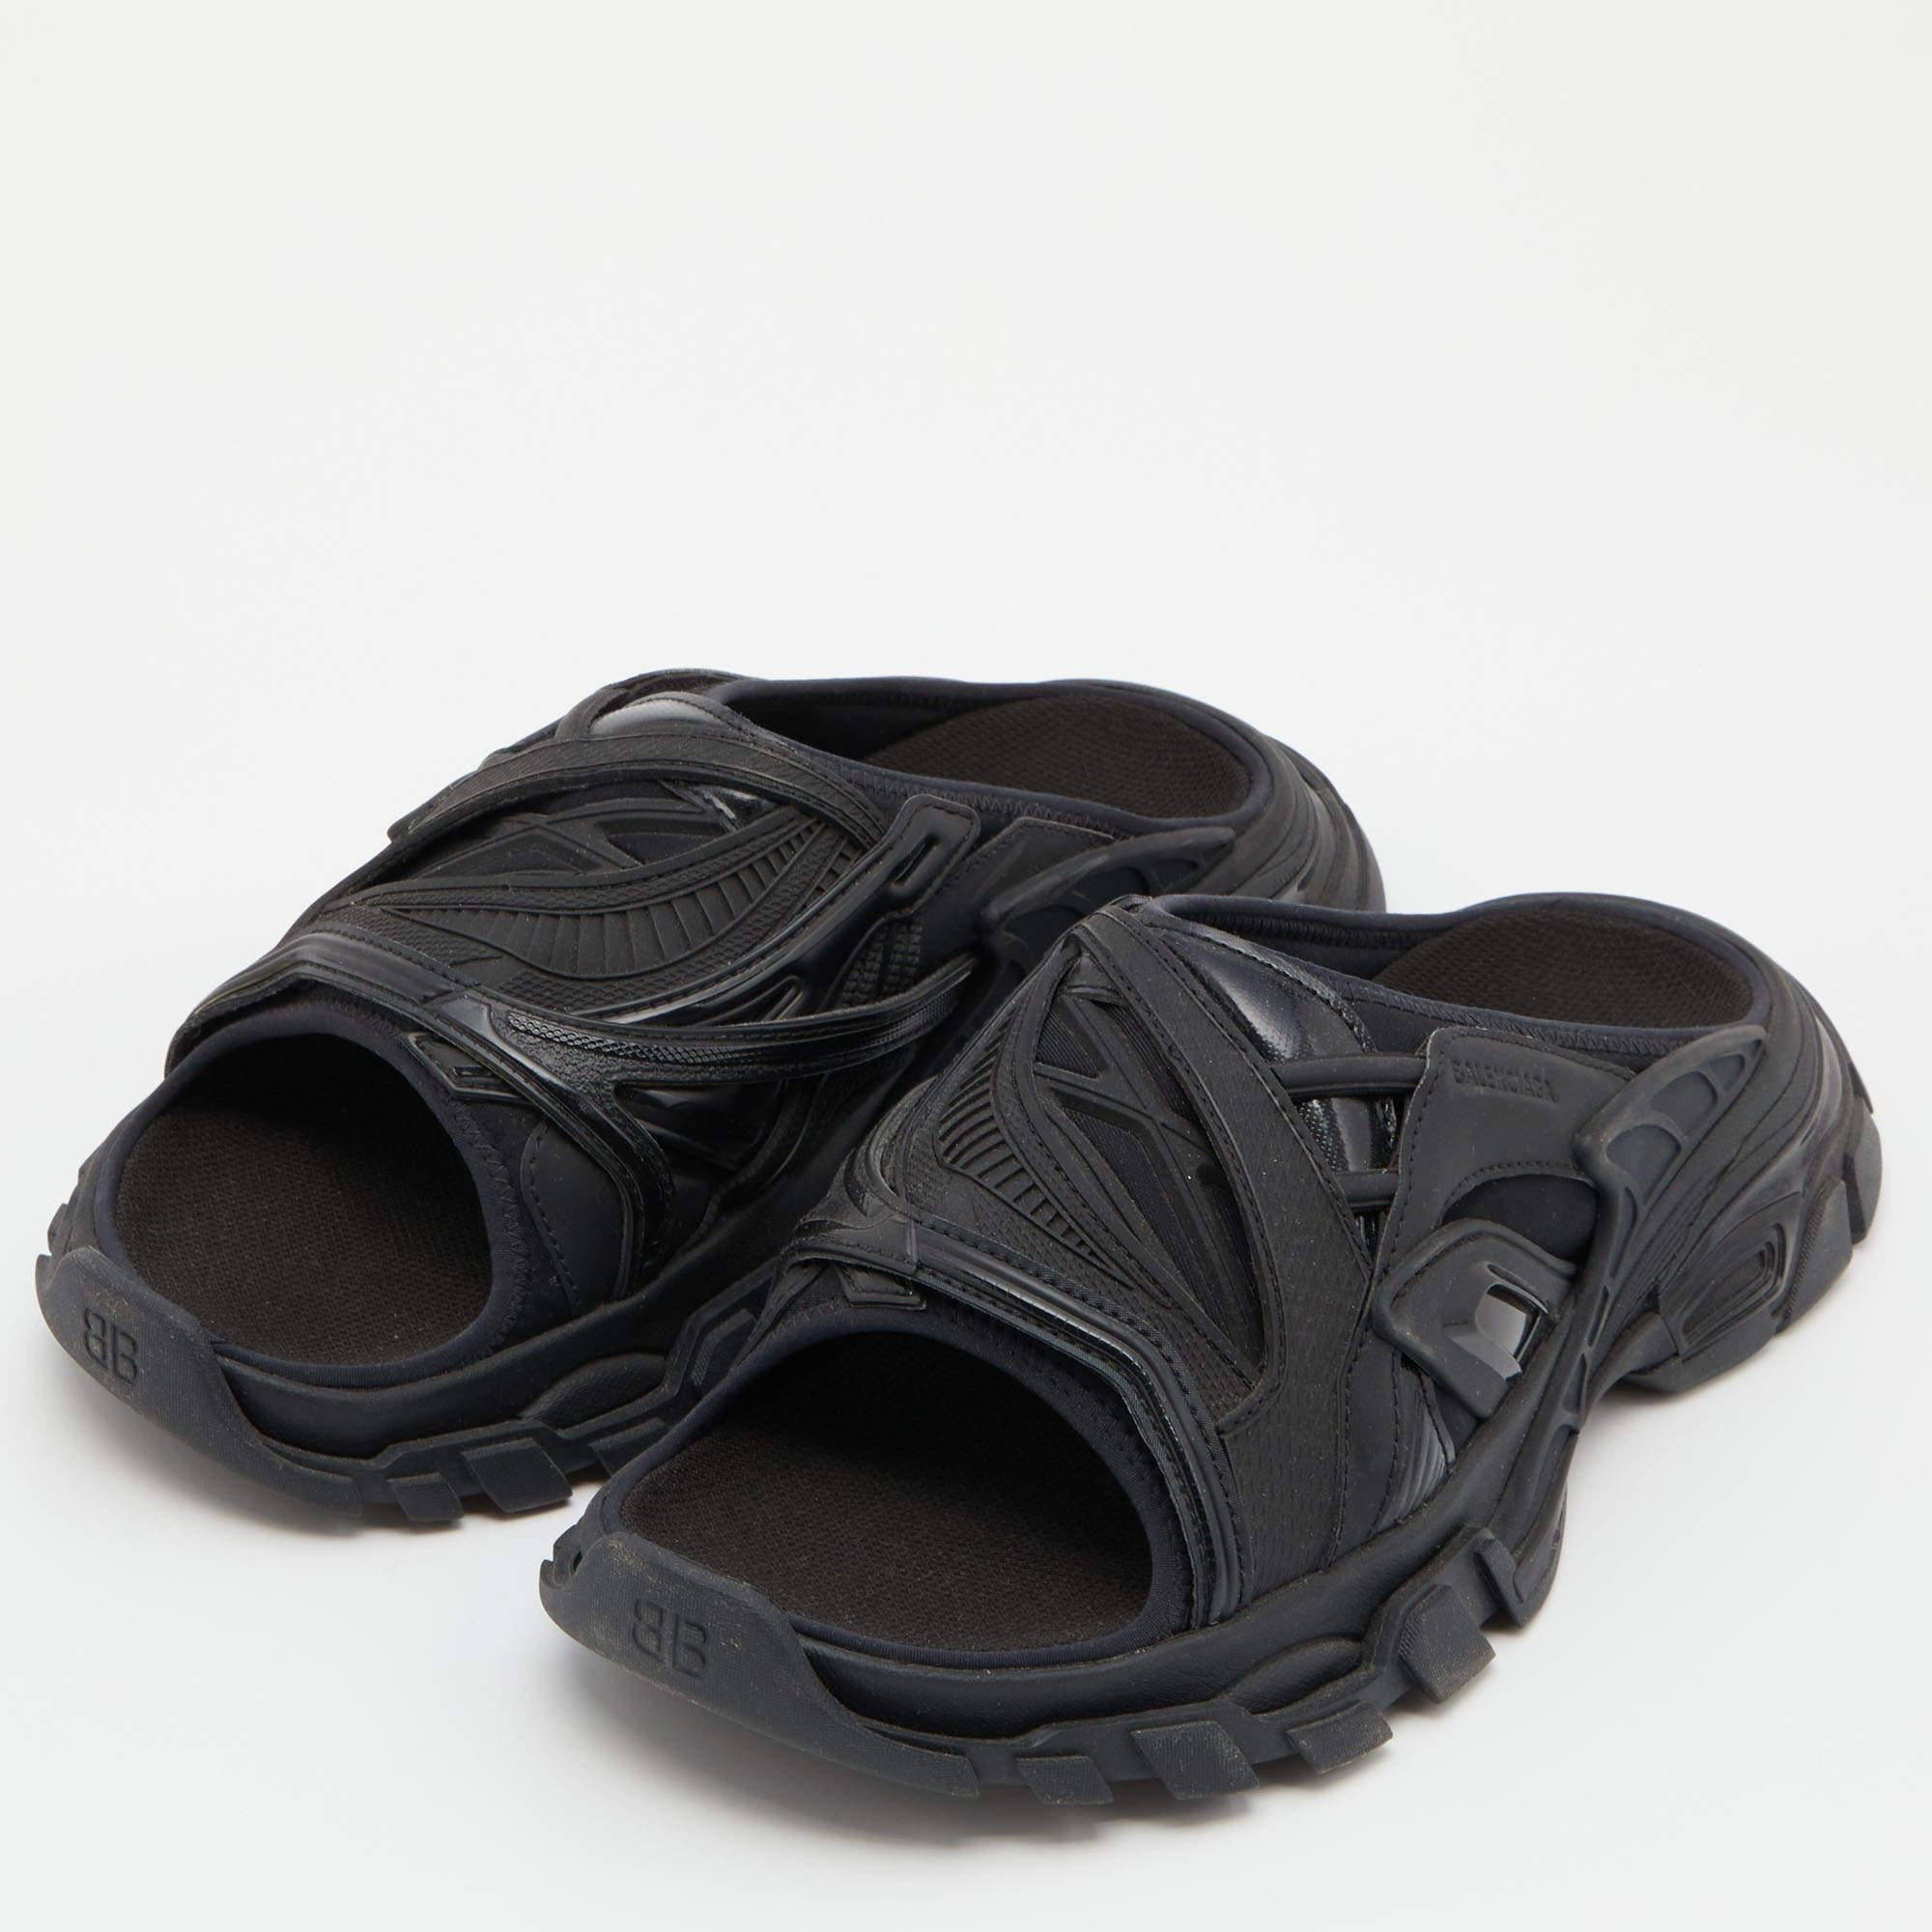 The attractive design of this pair of Balenciaga sandals makes it a perfect match with your casual edits. The slides are crafted from neoprene and leather in a classic shade of black and are finished with rubber soles.

